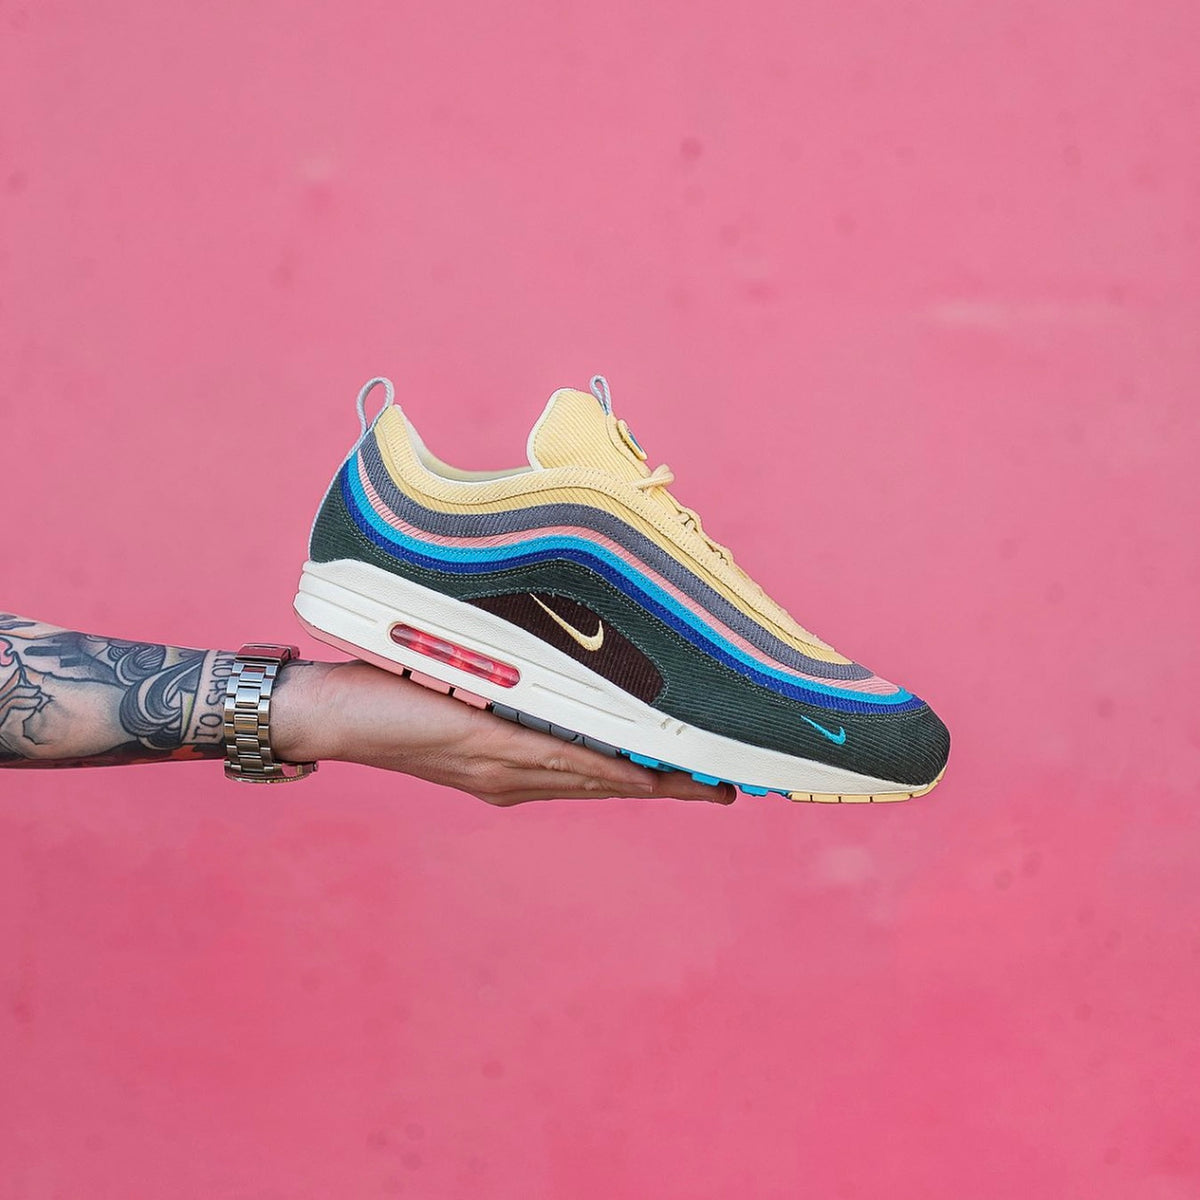 Premisa Realizable Indirecto The story behind: Nike Air Max 97/1 x Sean Wotherspoon – Sneakin